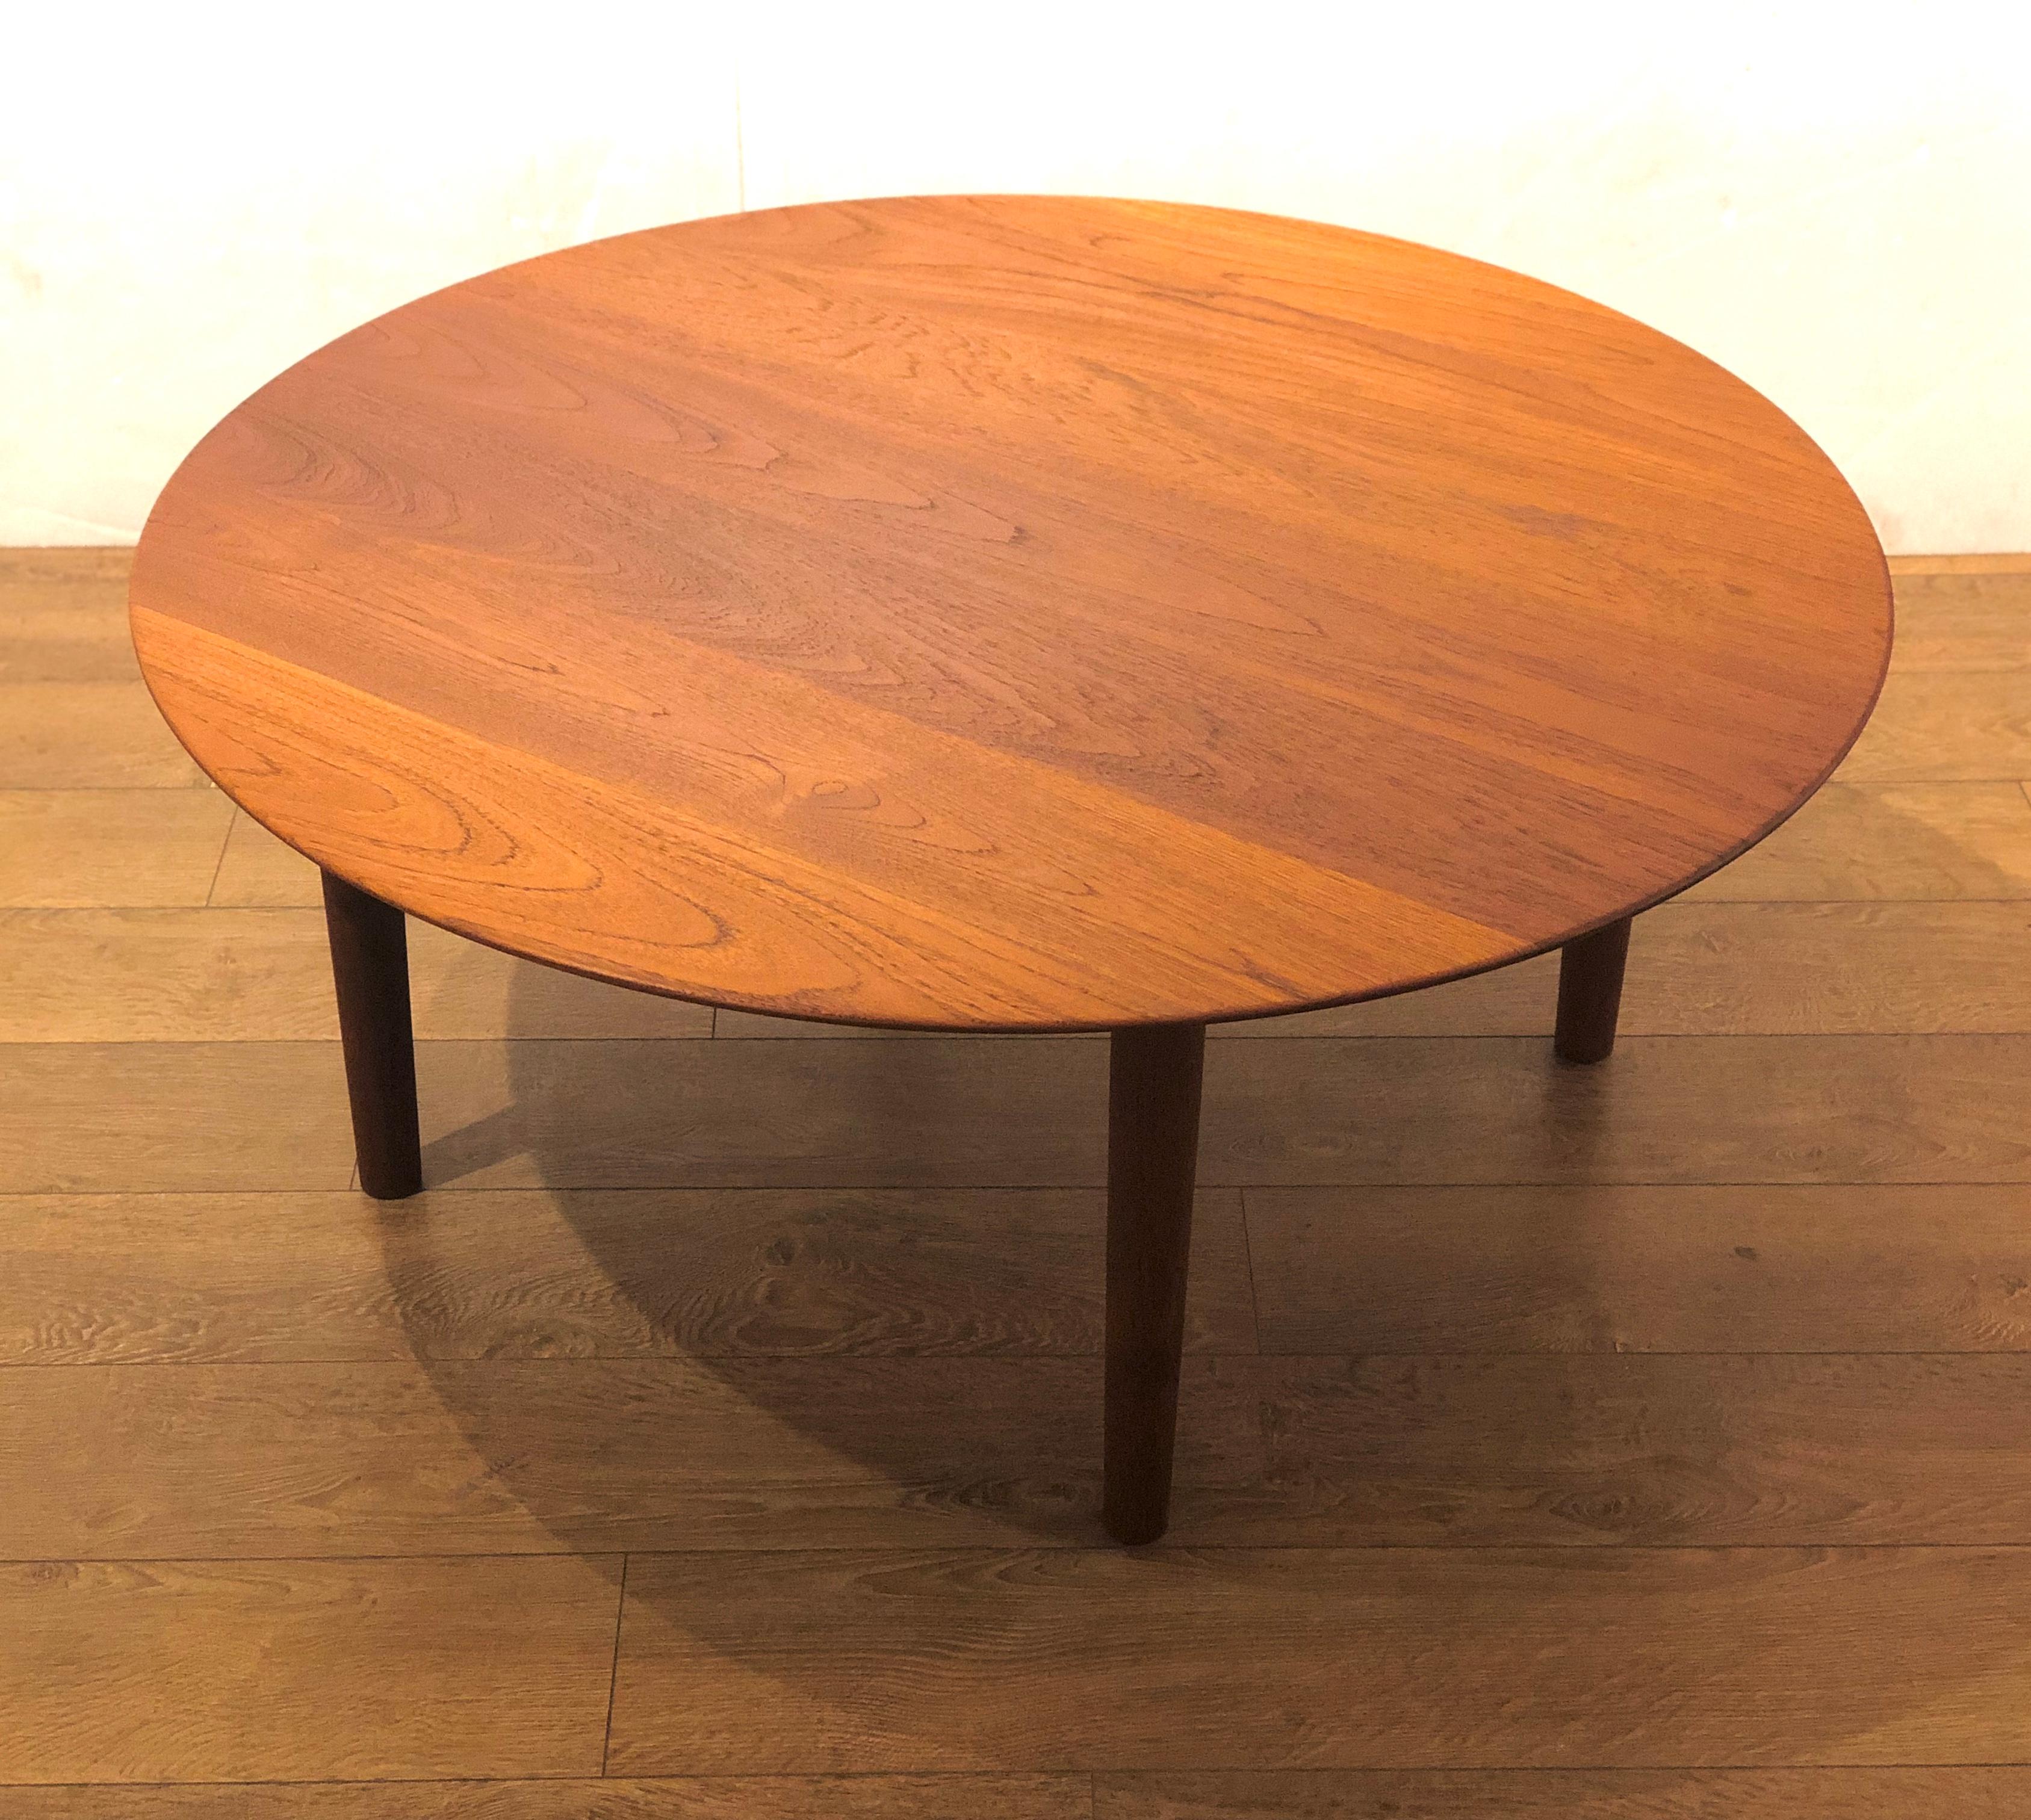 Incredible construction on this unique solid teak round coffee table, with removable legs and beveled edge, this great piece has a solid and sturdy construction freshly refinished, beautiful grain, circa 1960s.